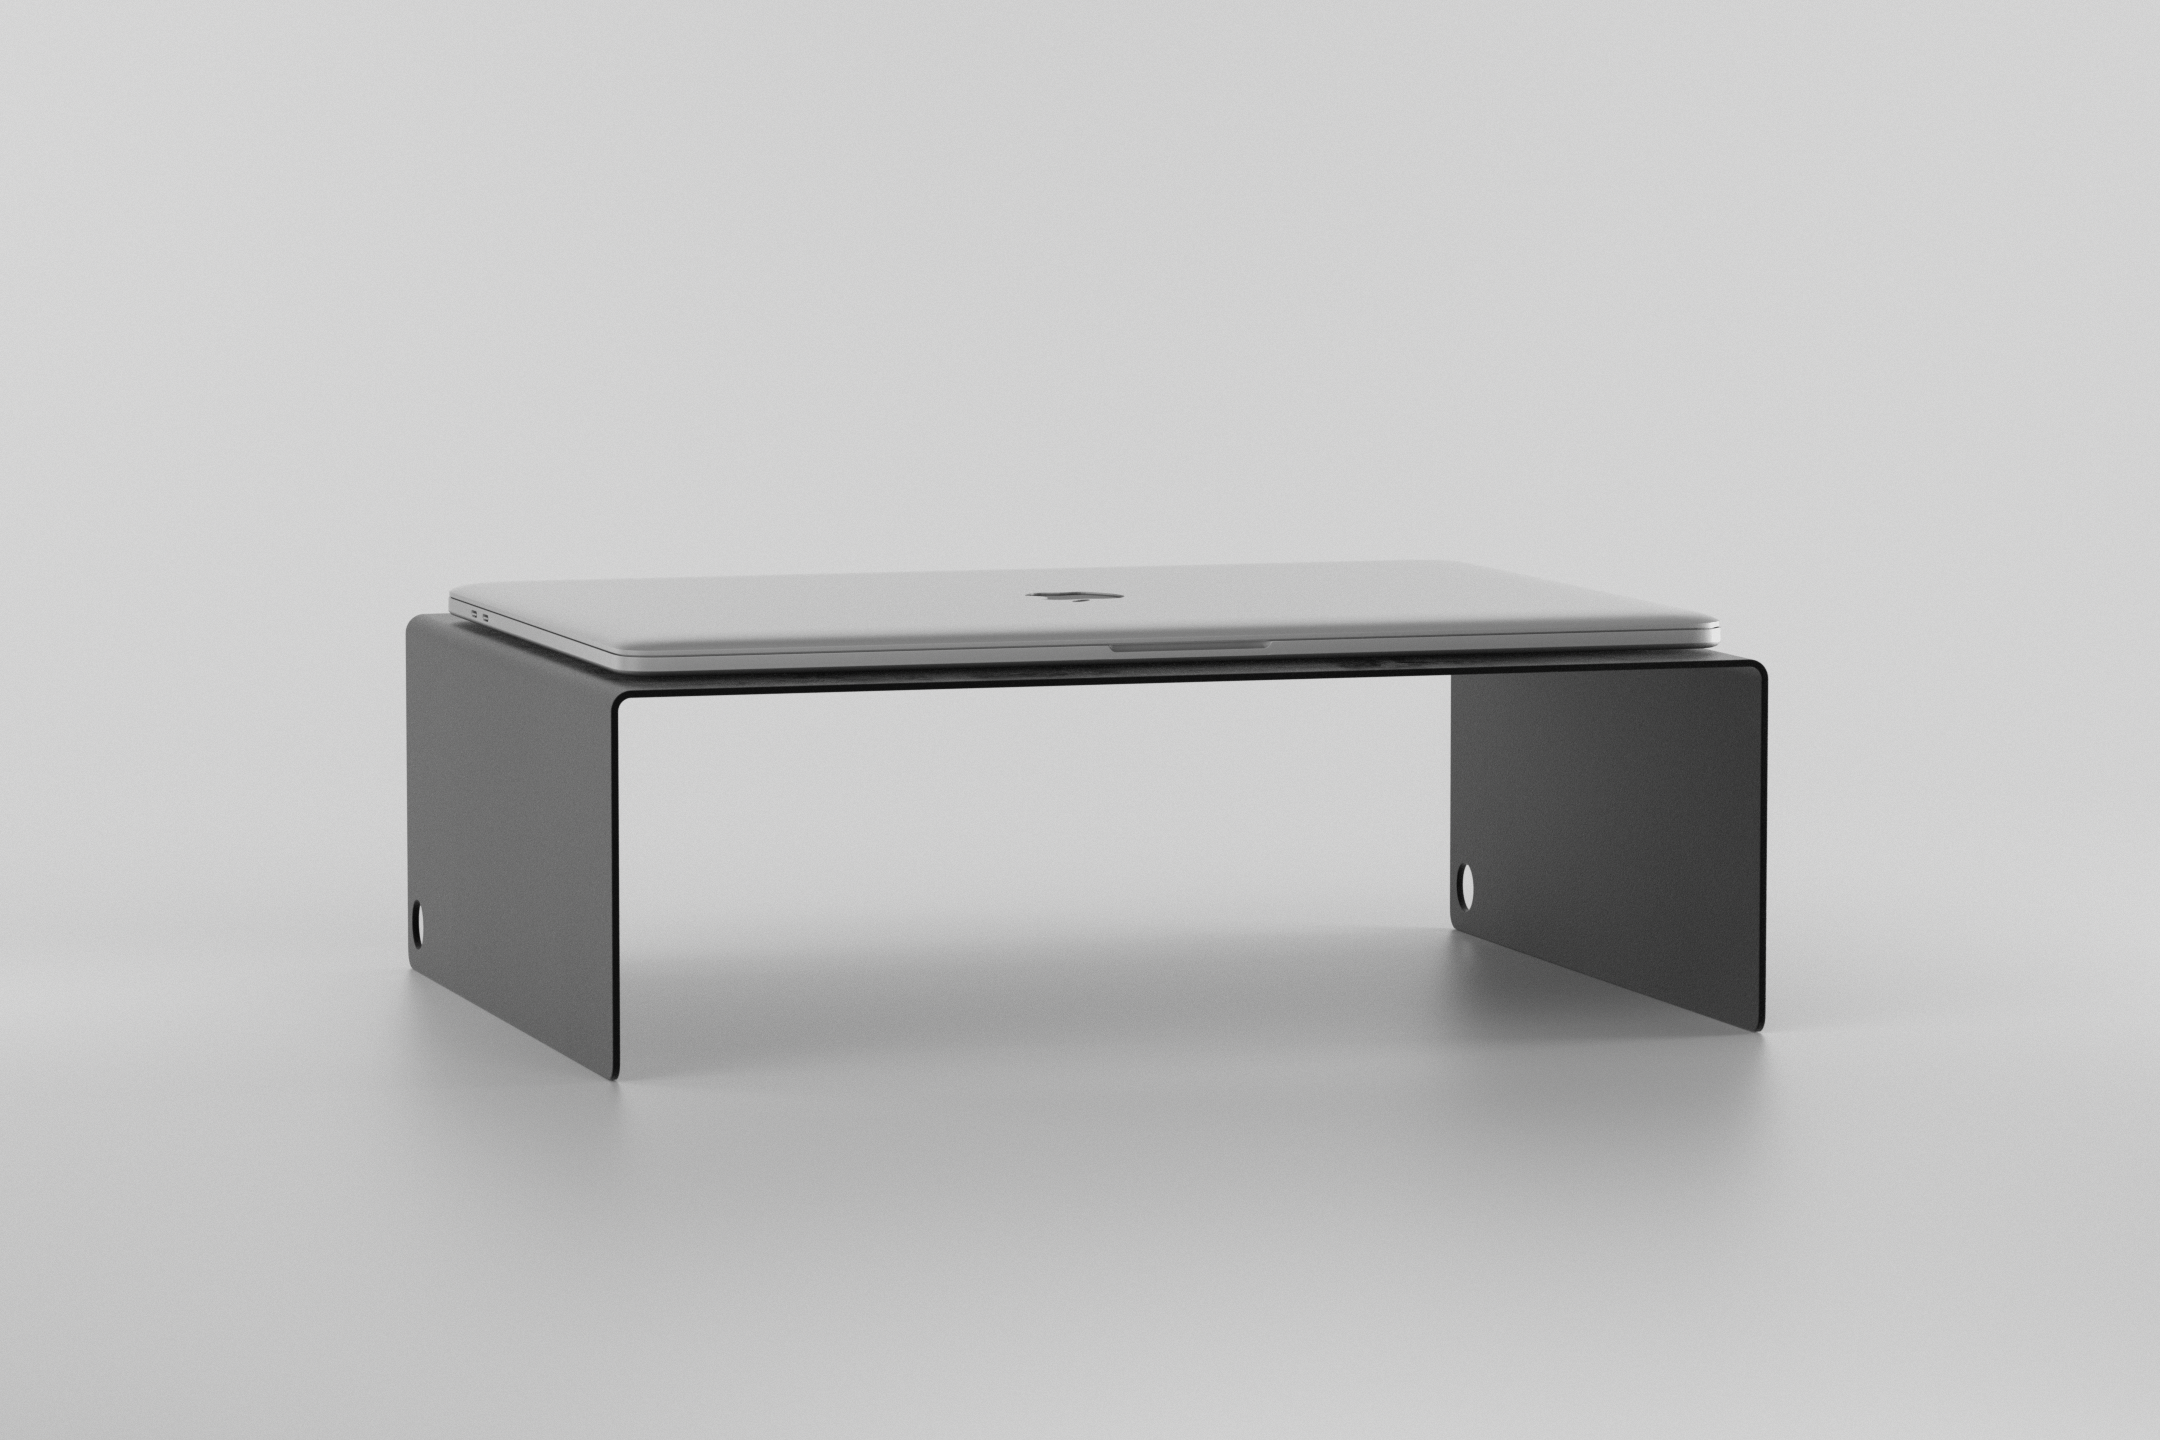 The Laptop Stand - black with laptop on it